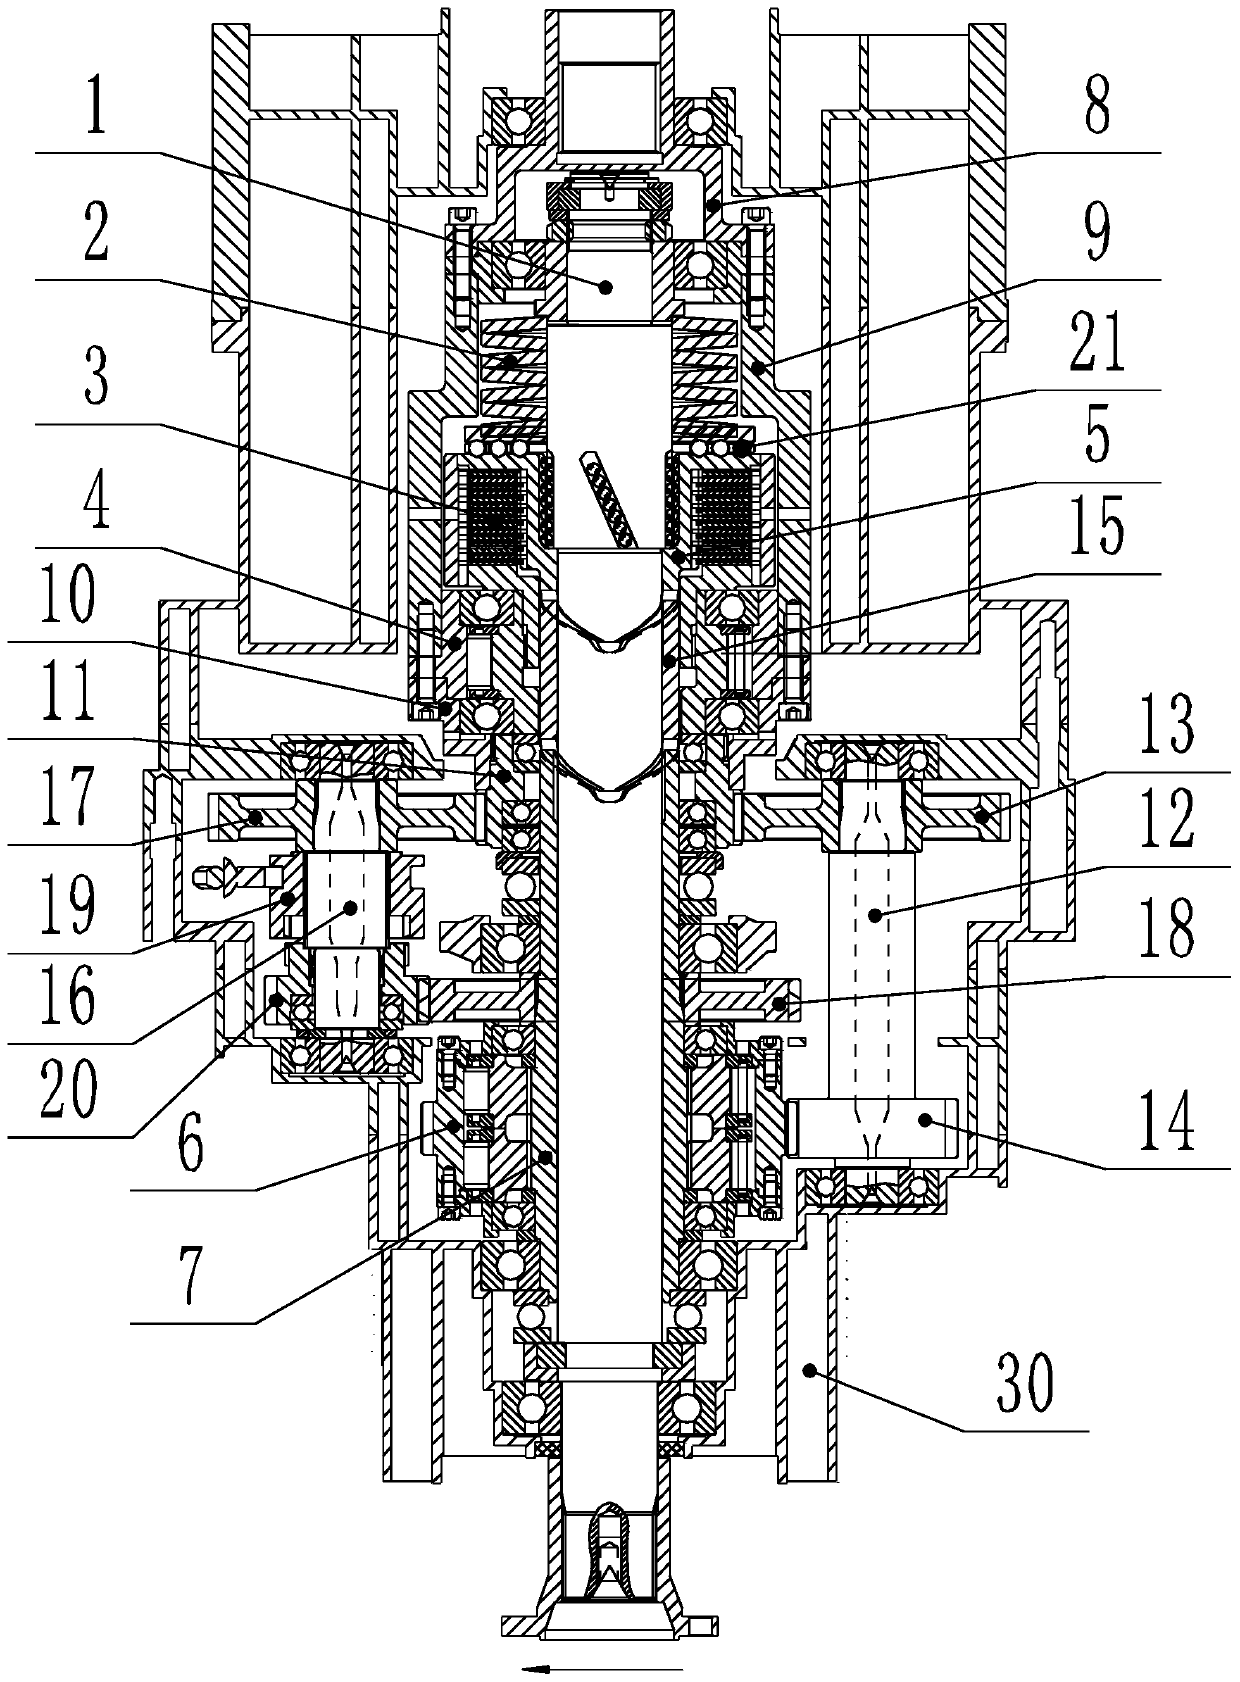 Full-mechanical self-adaptive automatic transmission with reverse gear function